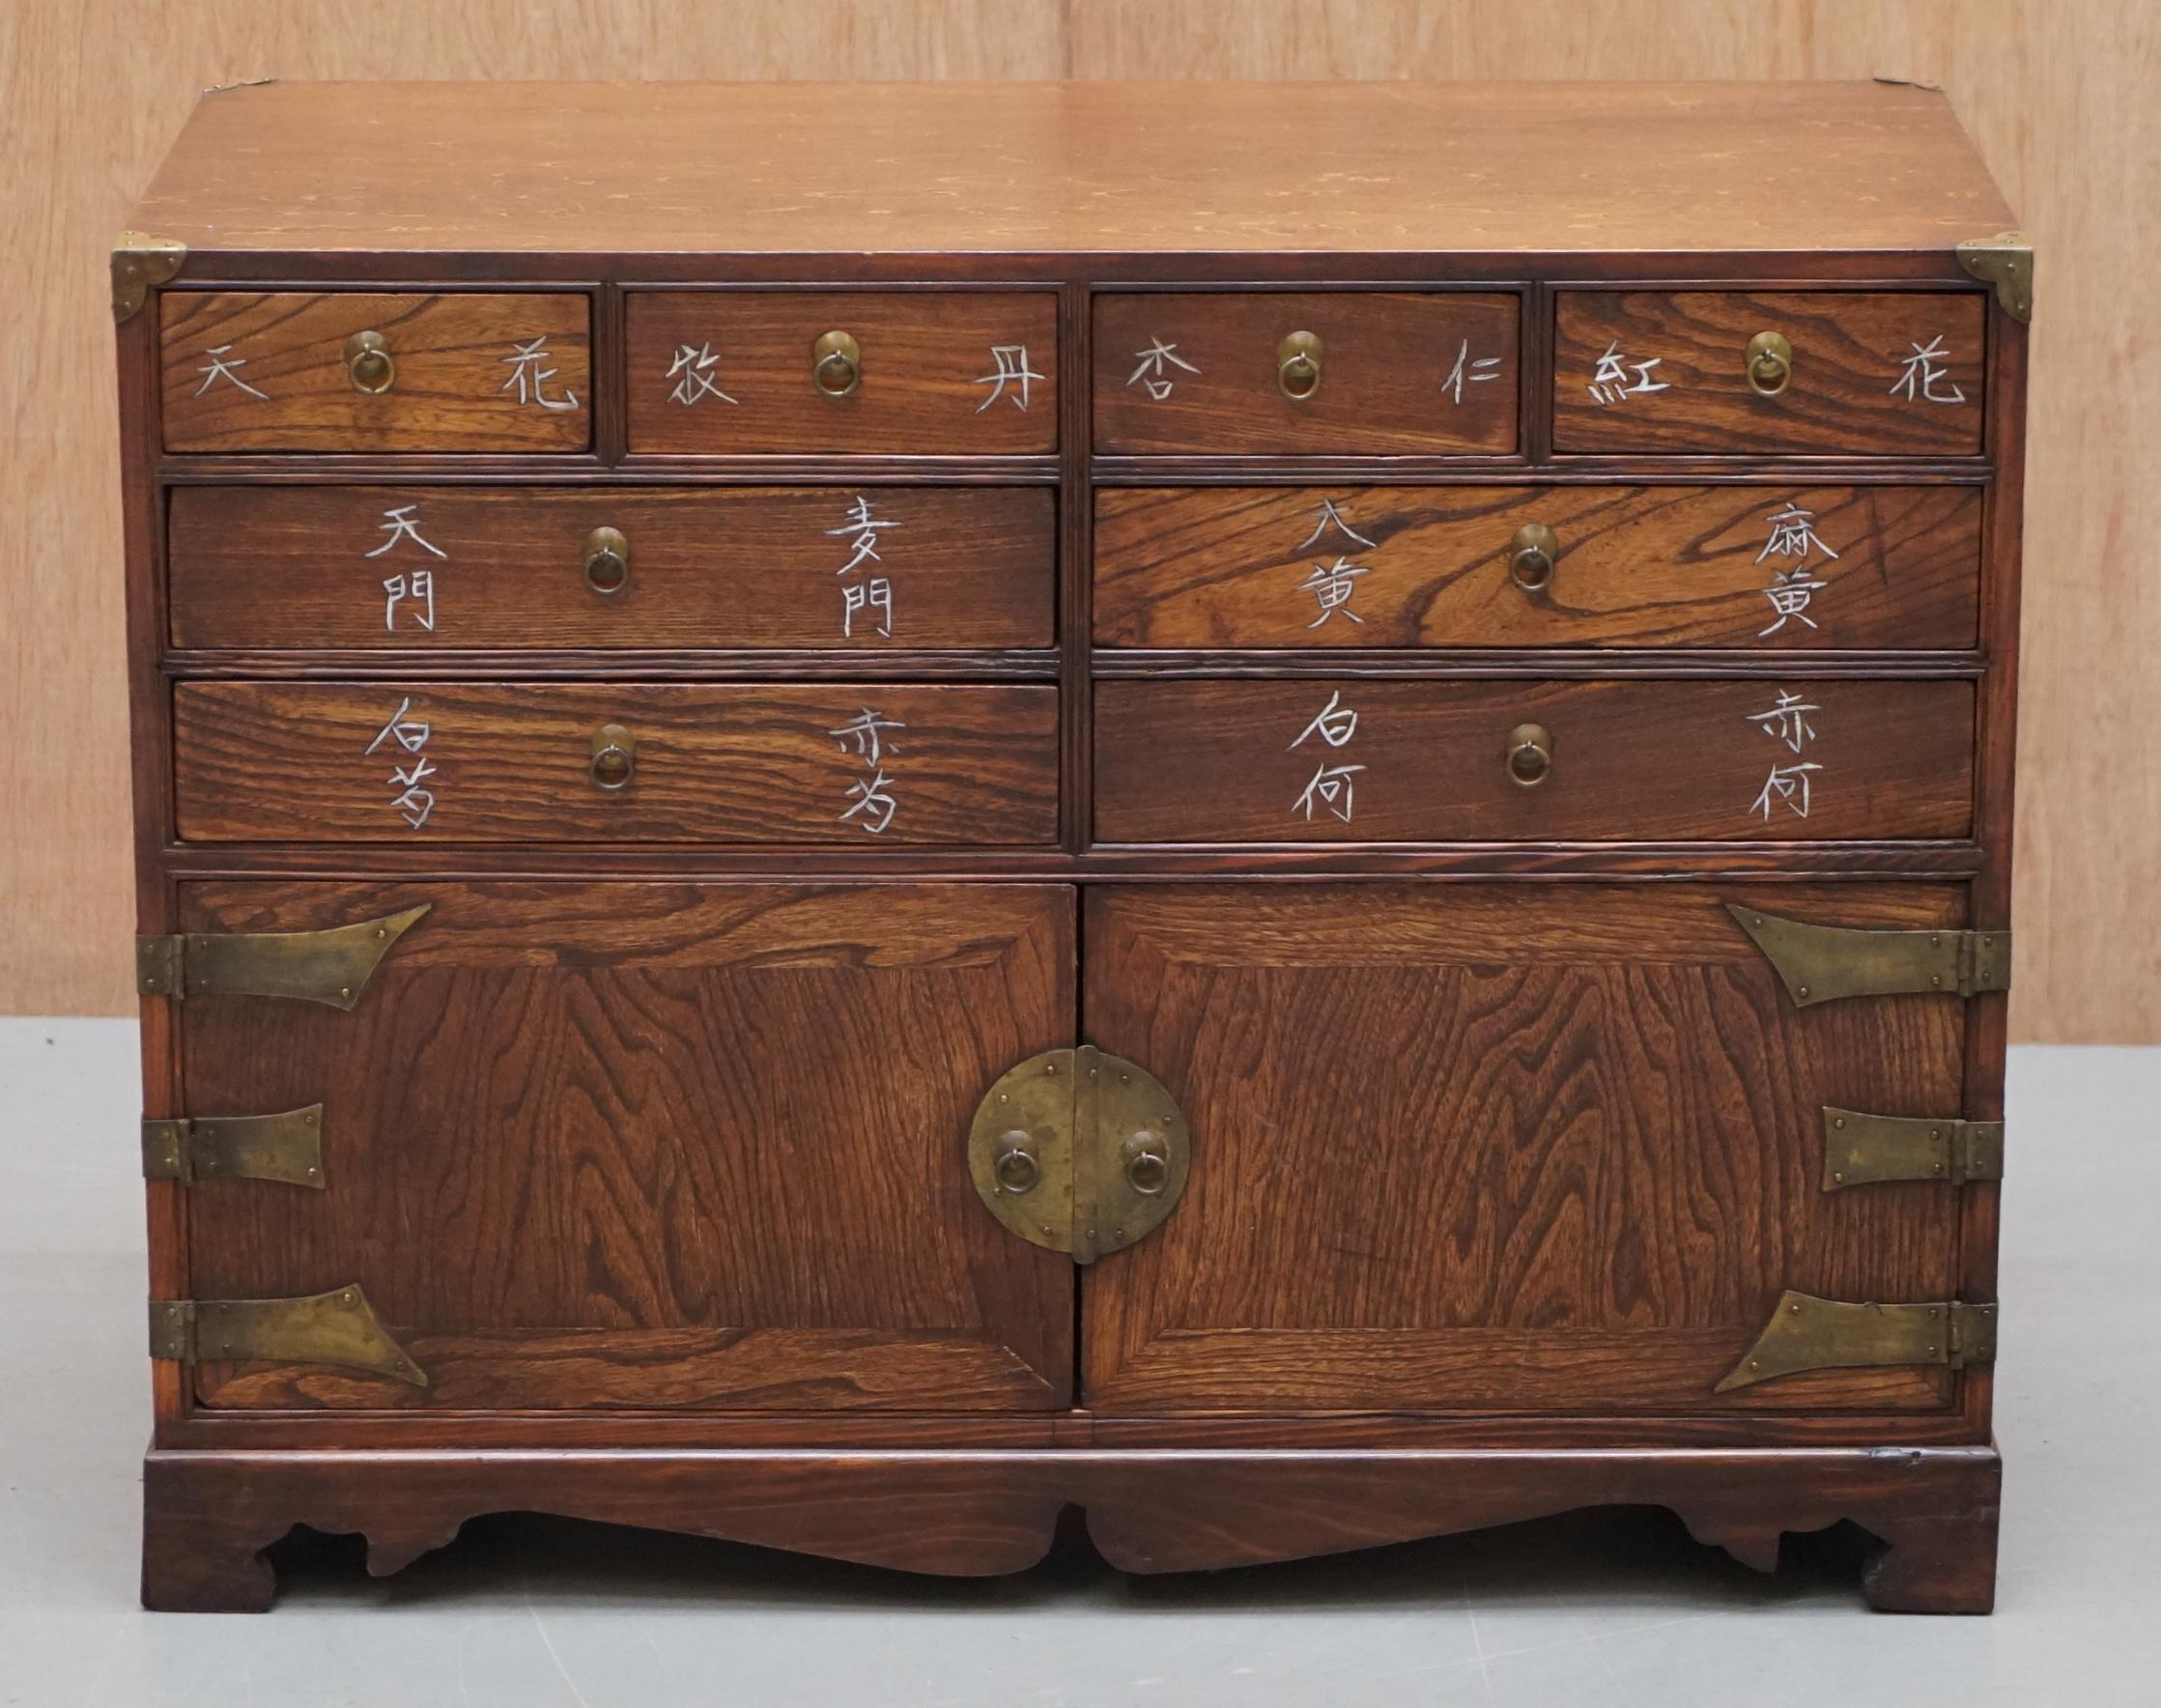 We are delighted to offer for sale this lovely small Apothecary Burl Elm Chinese chest of drawers with cupboard base

A good looking and decorative piece, it’s the right size as a large decorative side table or perhaps a television stand

We